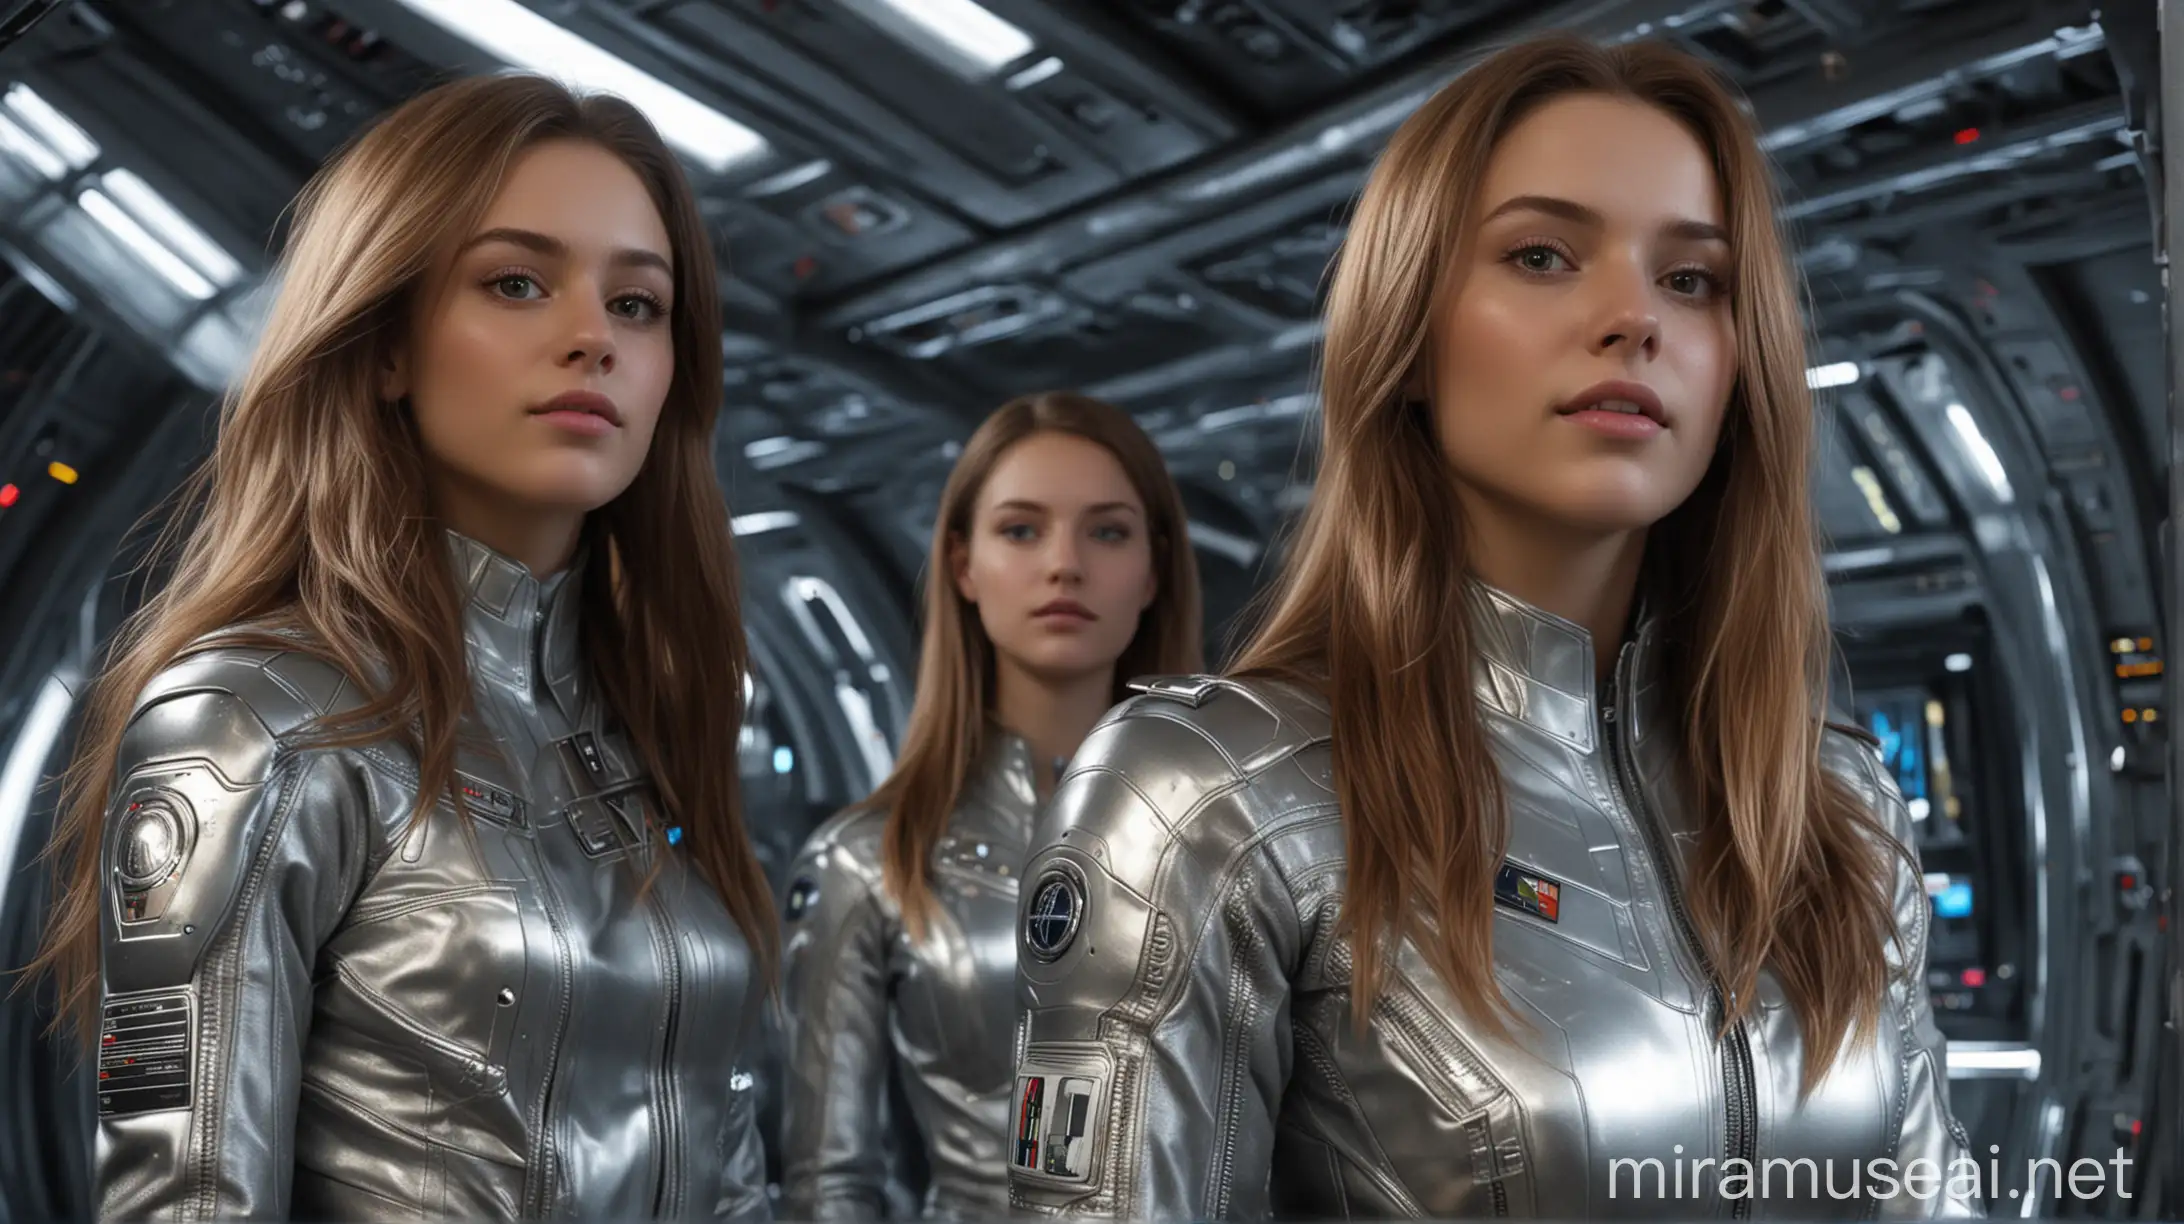 Three Young Women in Silver Metallic Outfits in SciFi Starship Command Compartment